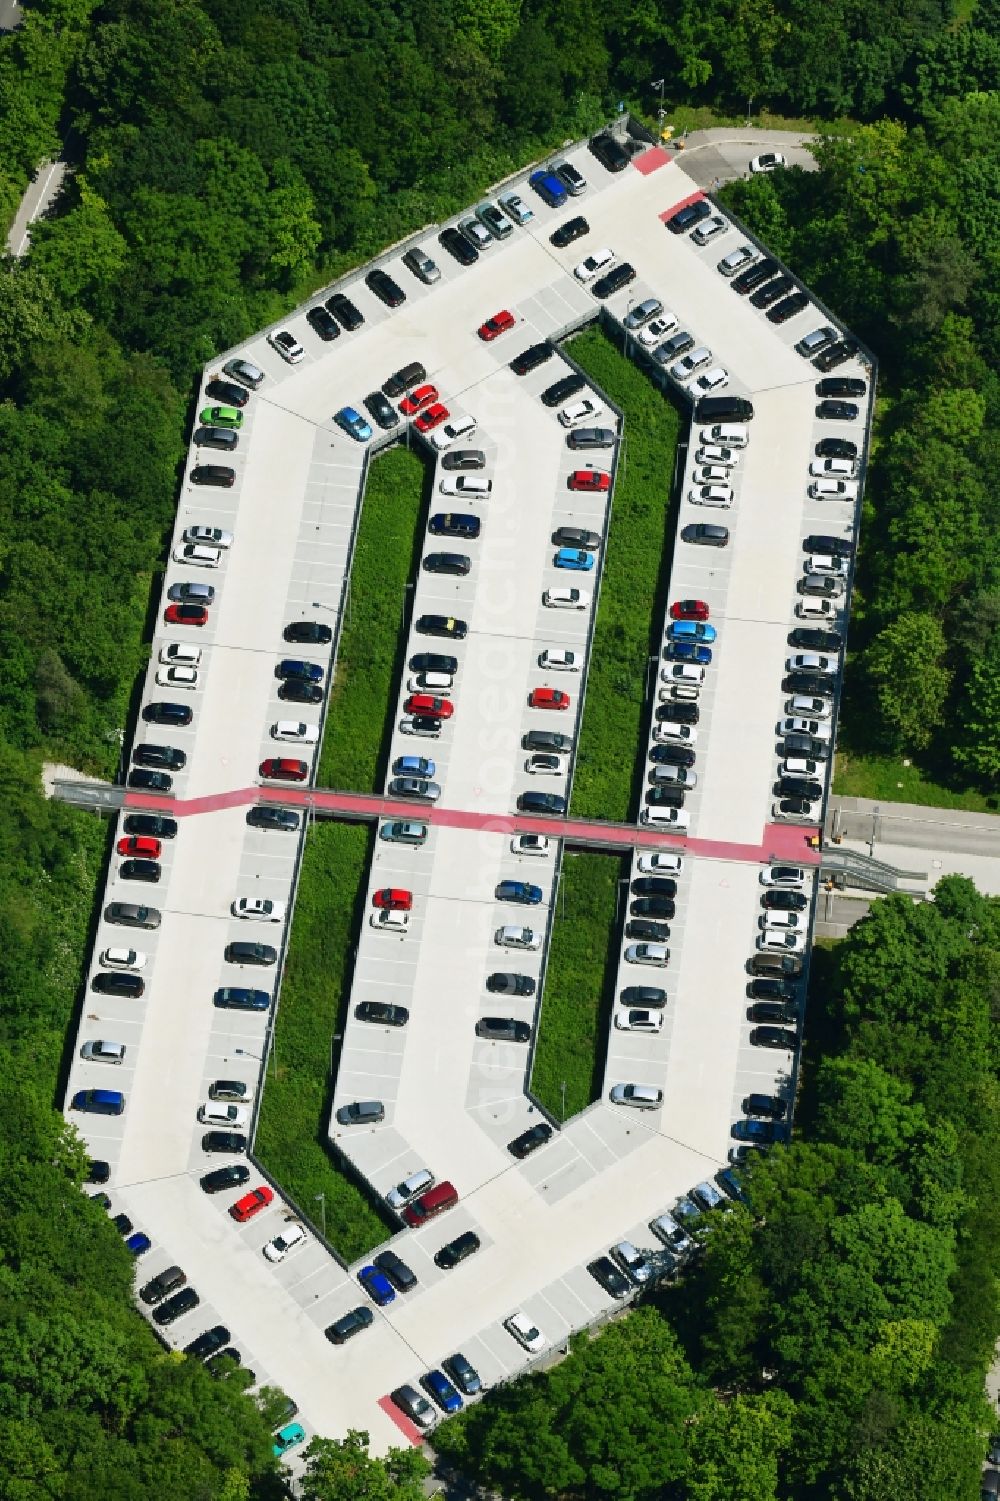 Augsburg from above - Parking deck on the building of the car park Universitaetsparkhaus P1 on Hannah-Arendt-Strasse in Augsburg in the state Bavaria, Germany